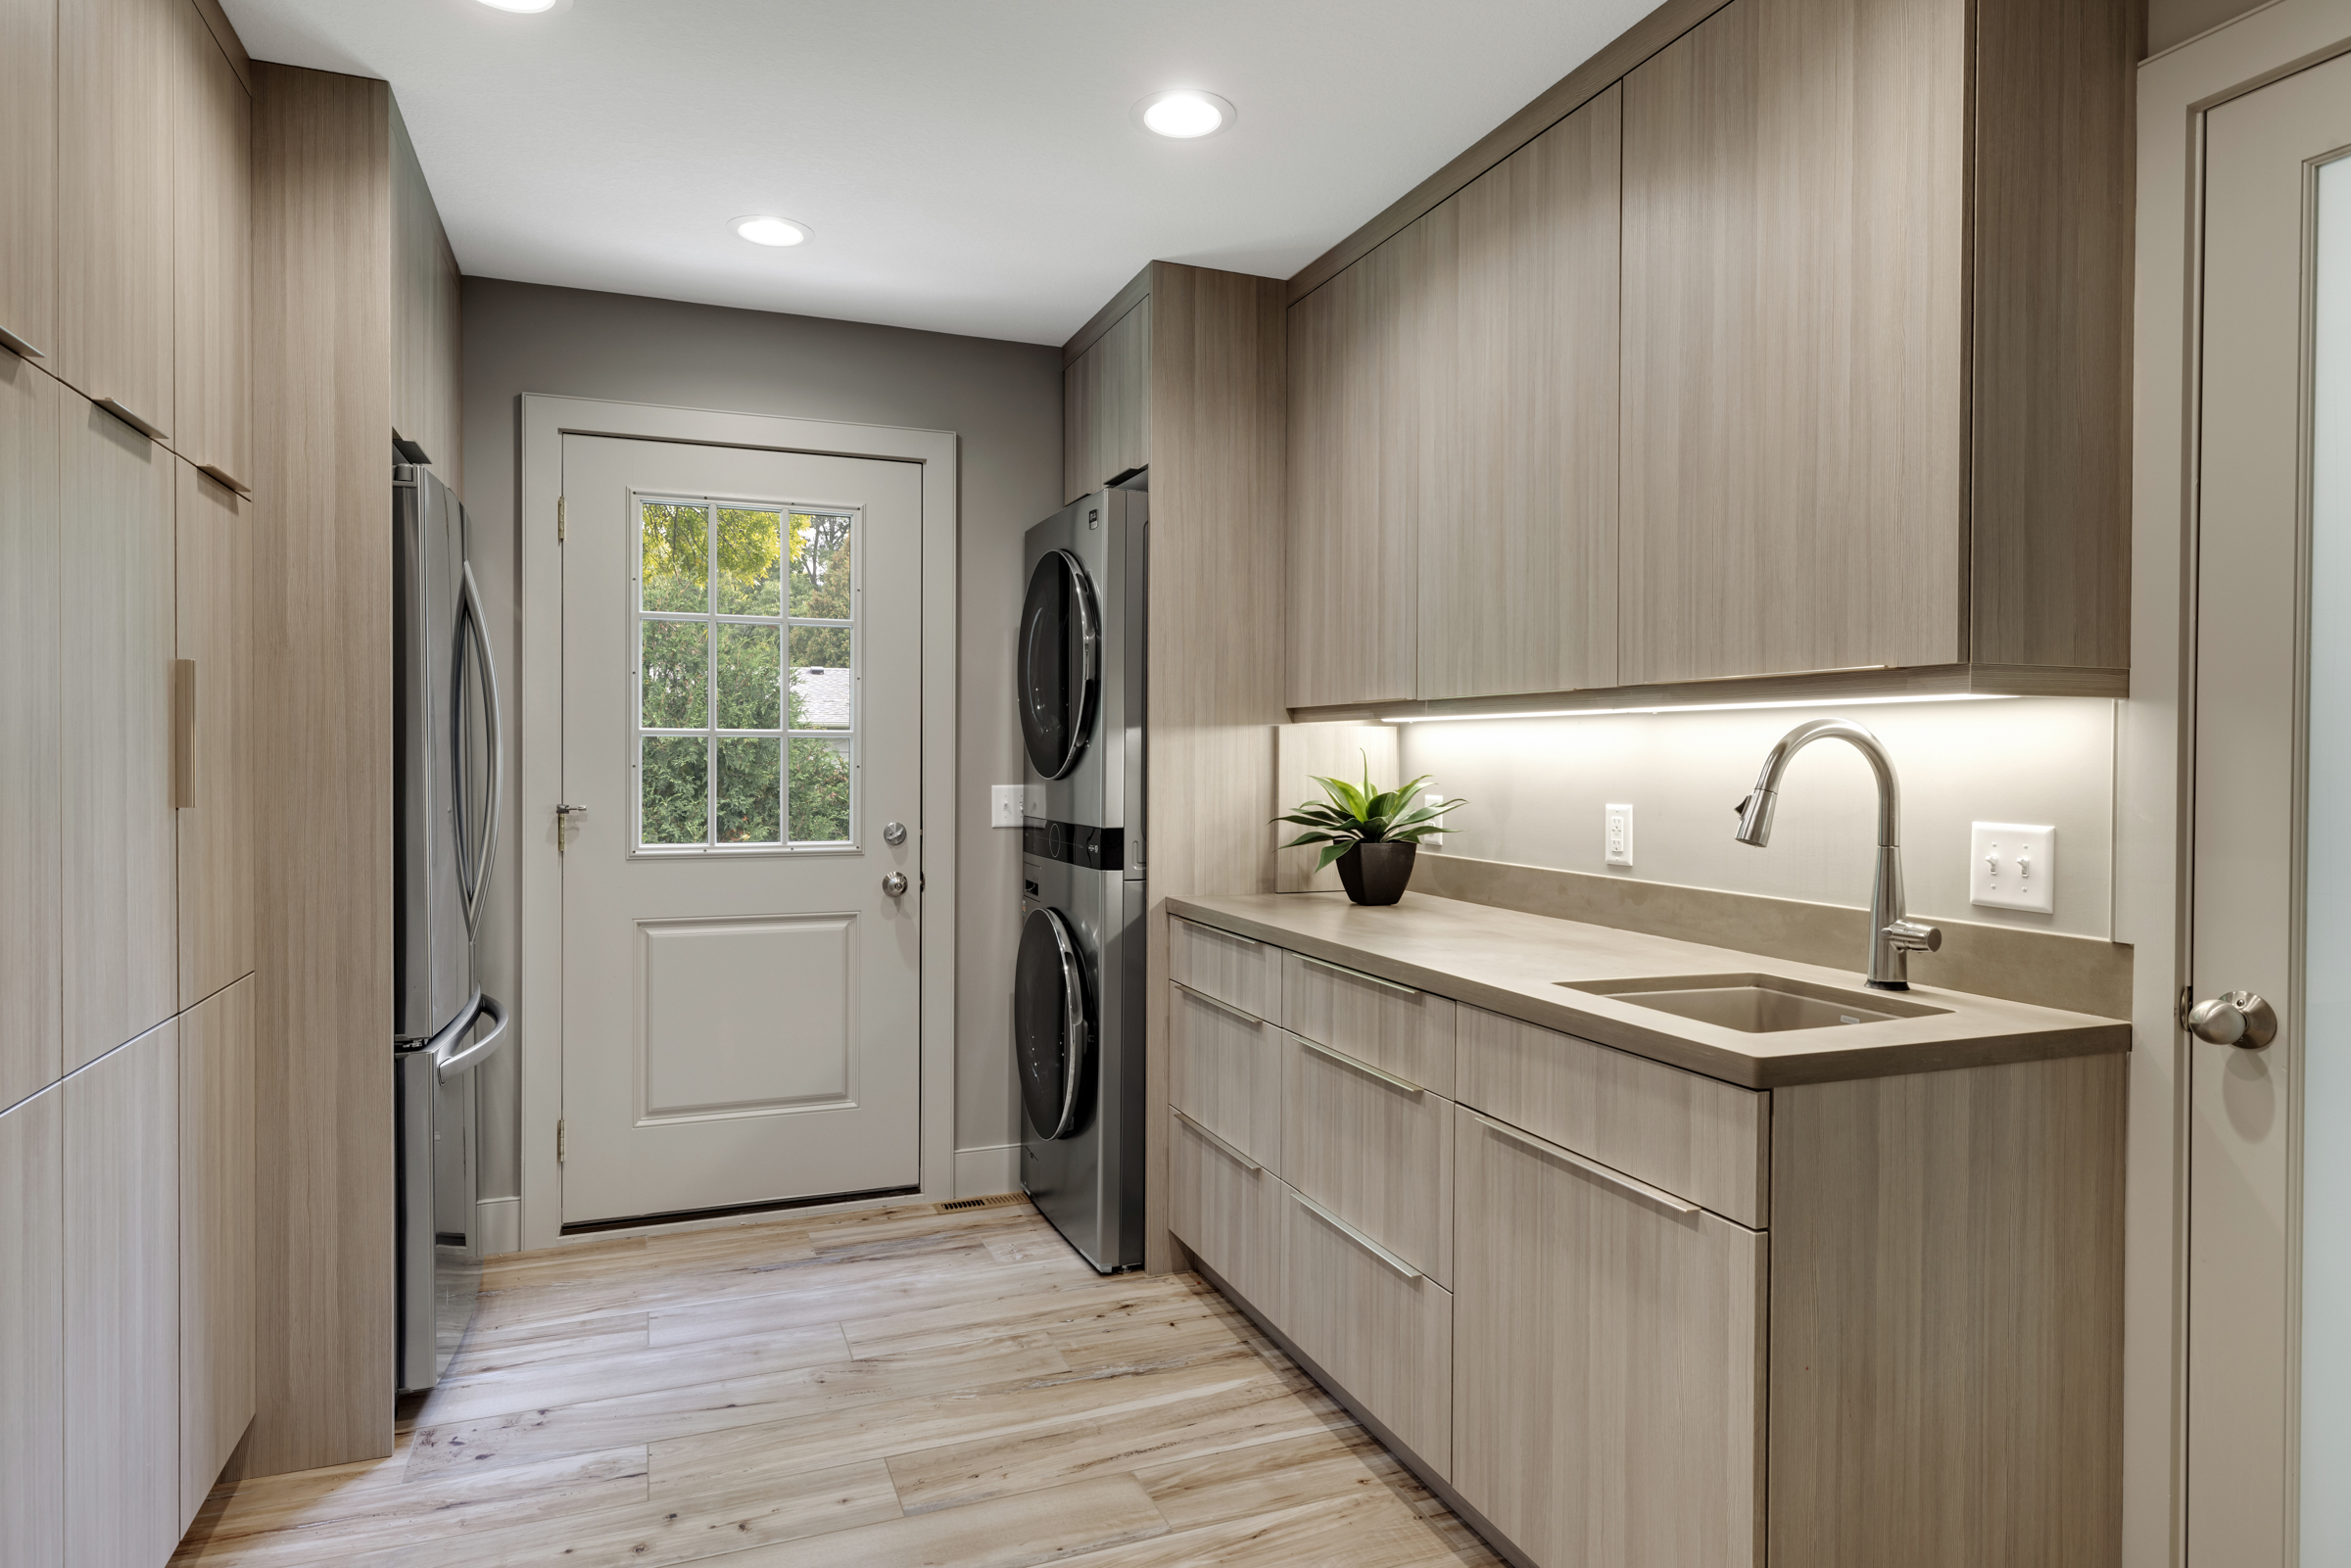 Contemporary laundry room with light wood floor, light wood cabinets, and plenty of storage